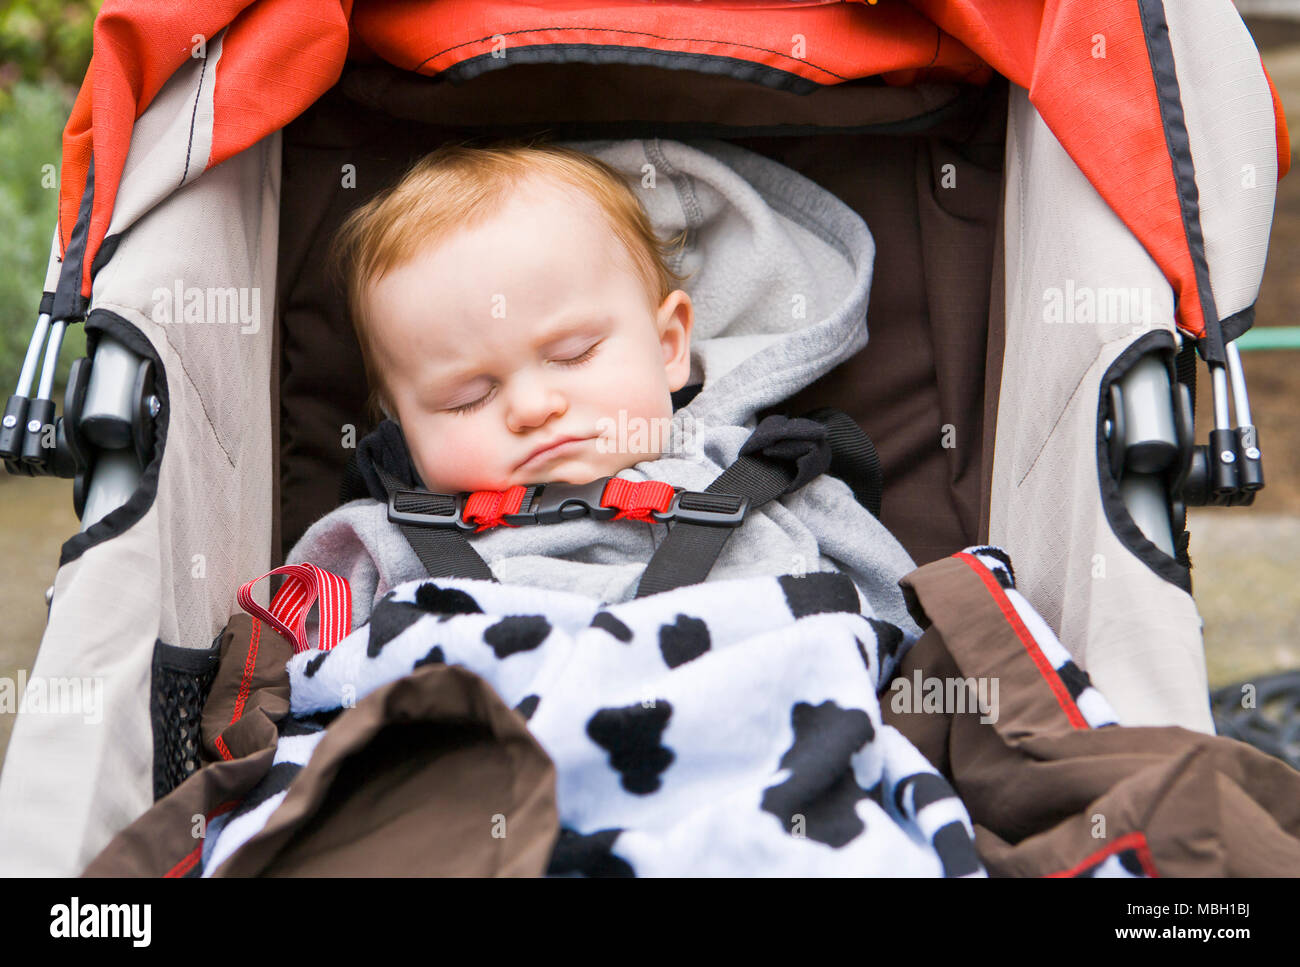 A 10 month old baby boy asleep in his stroller. Stock Photo